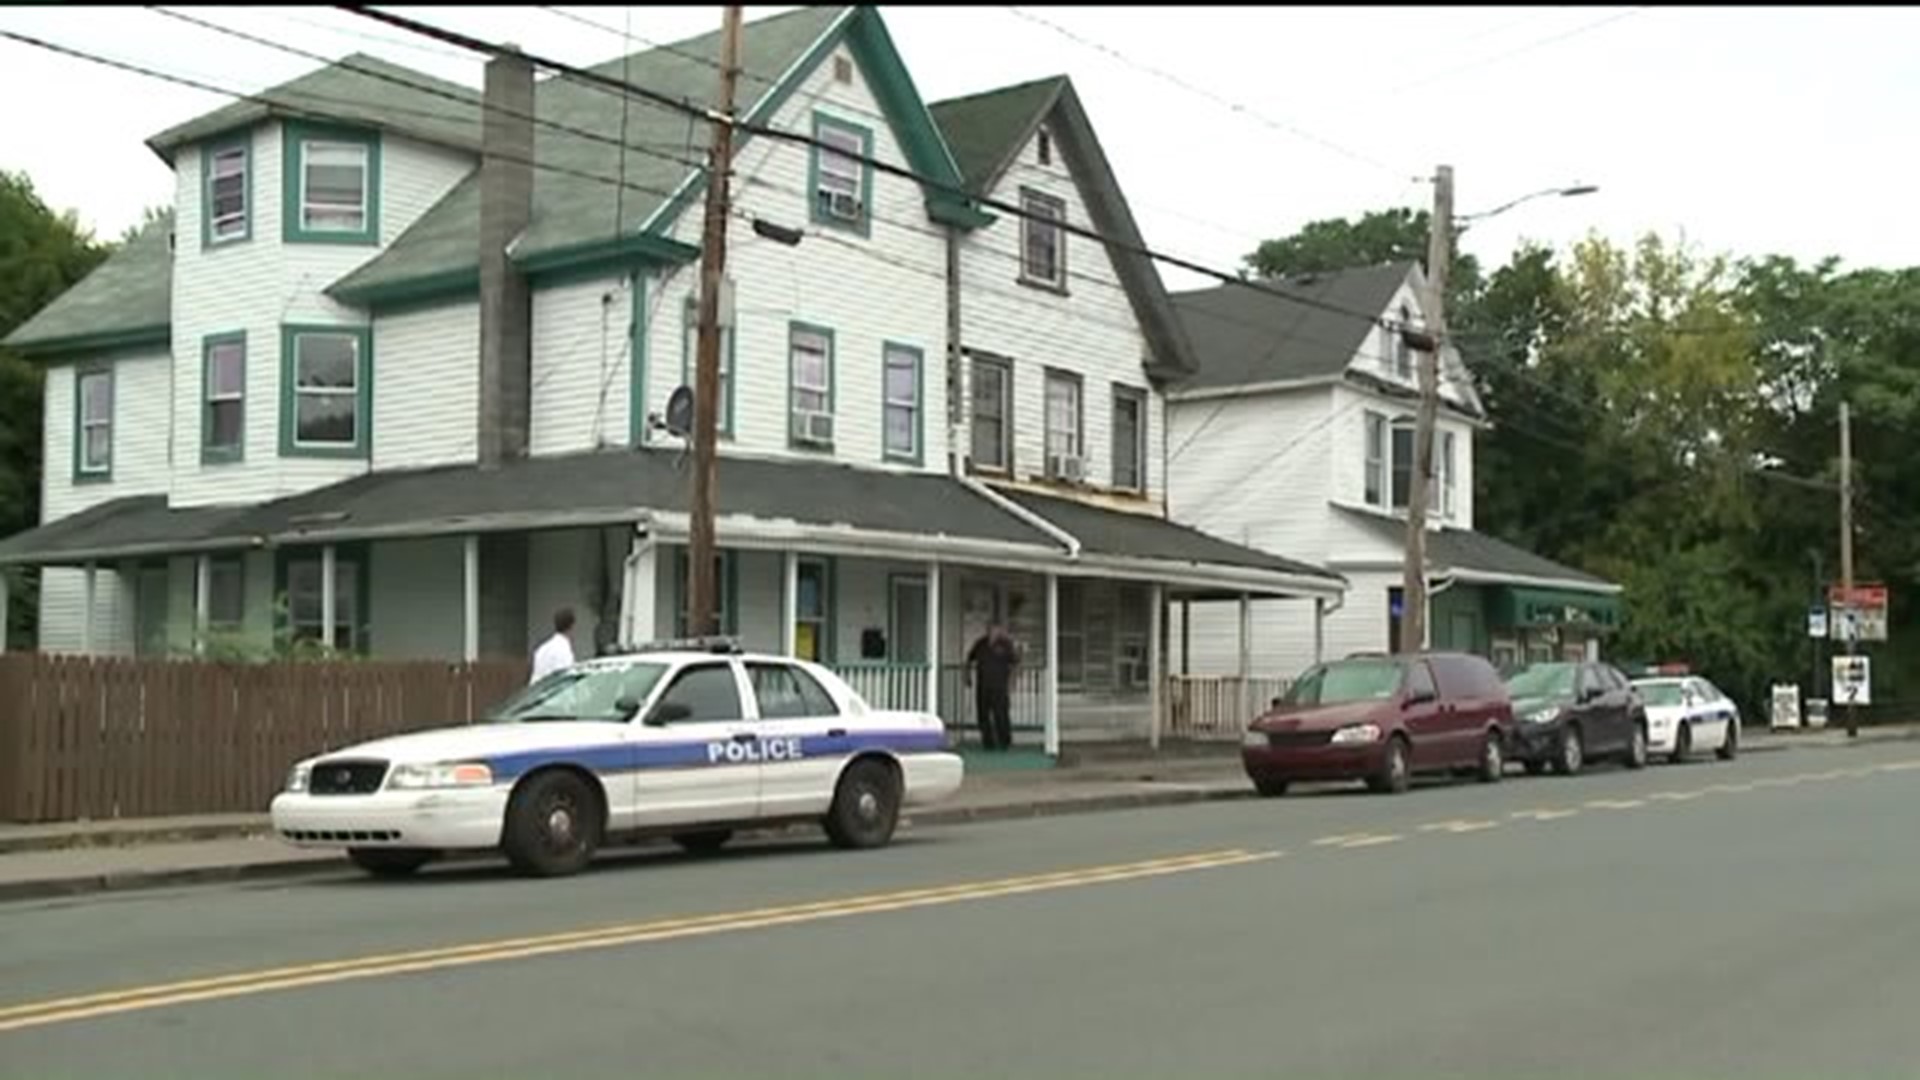 Police Search, Condemn Home in Wilkes-Barre